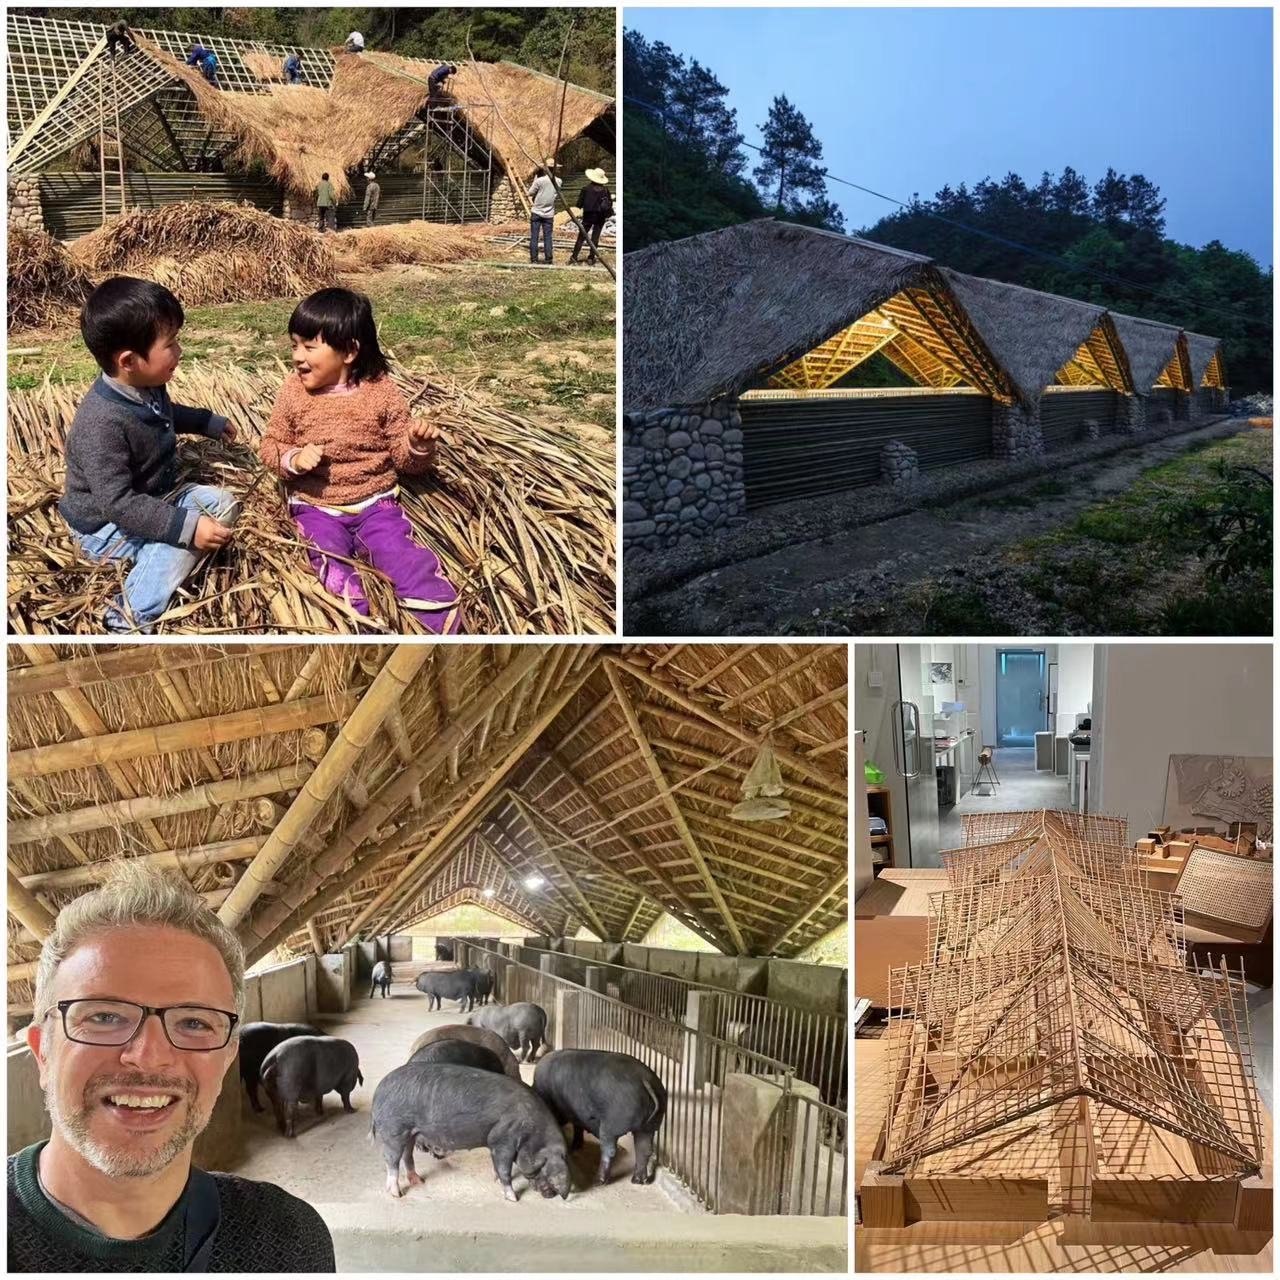 Chen Haoru: The architectural centrepiece of the 太阳 [Tàiyáng] Commune sustainability project was the pig barn.